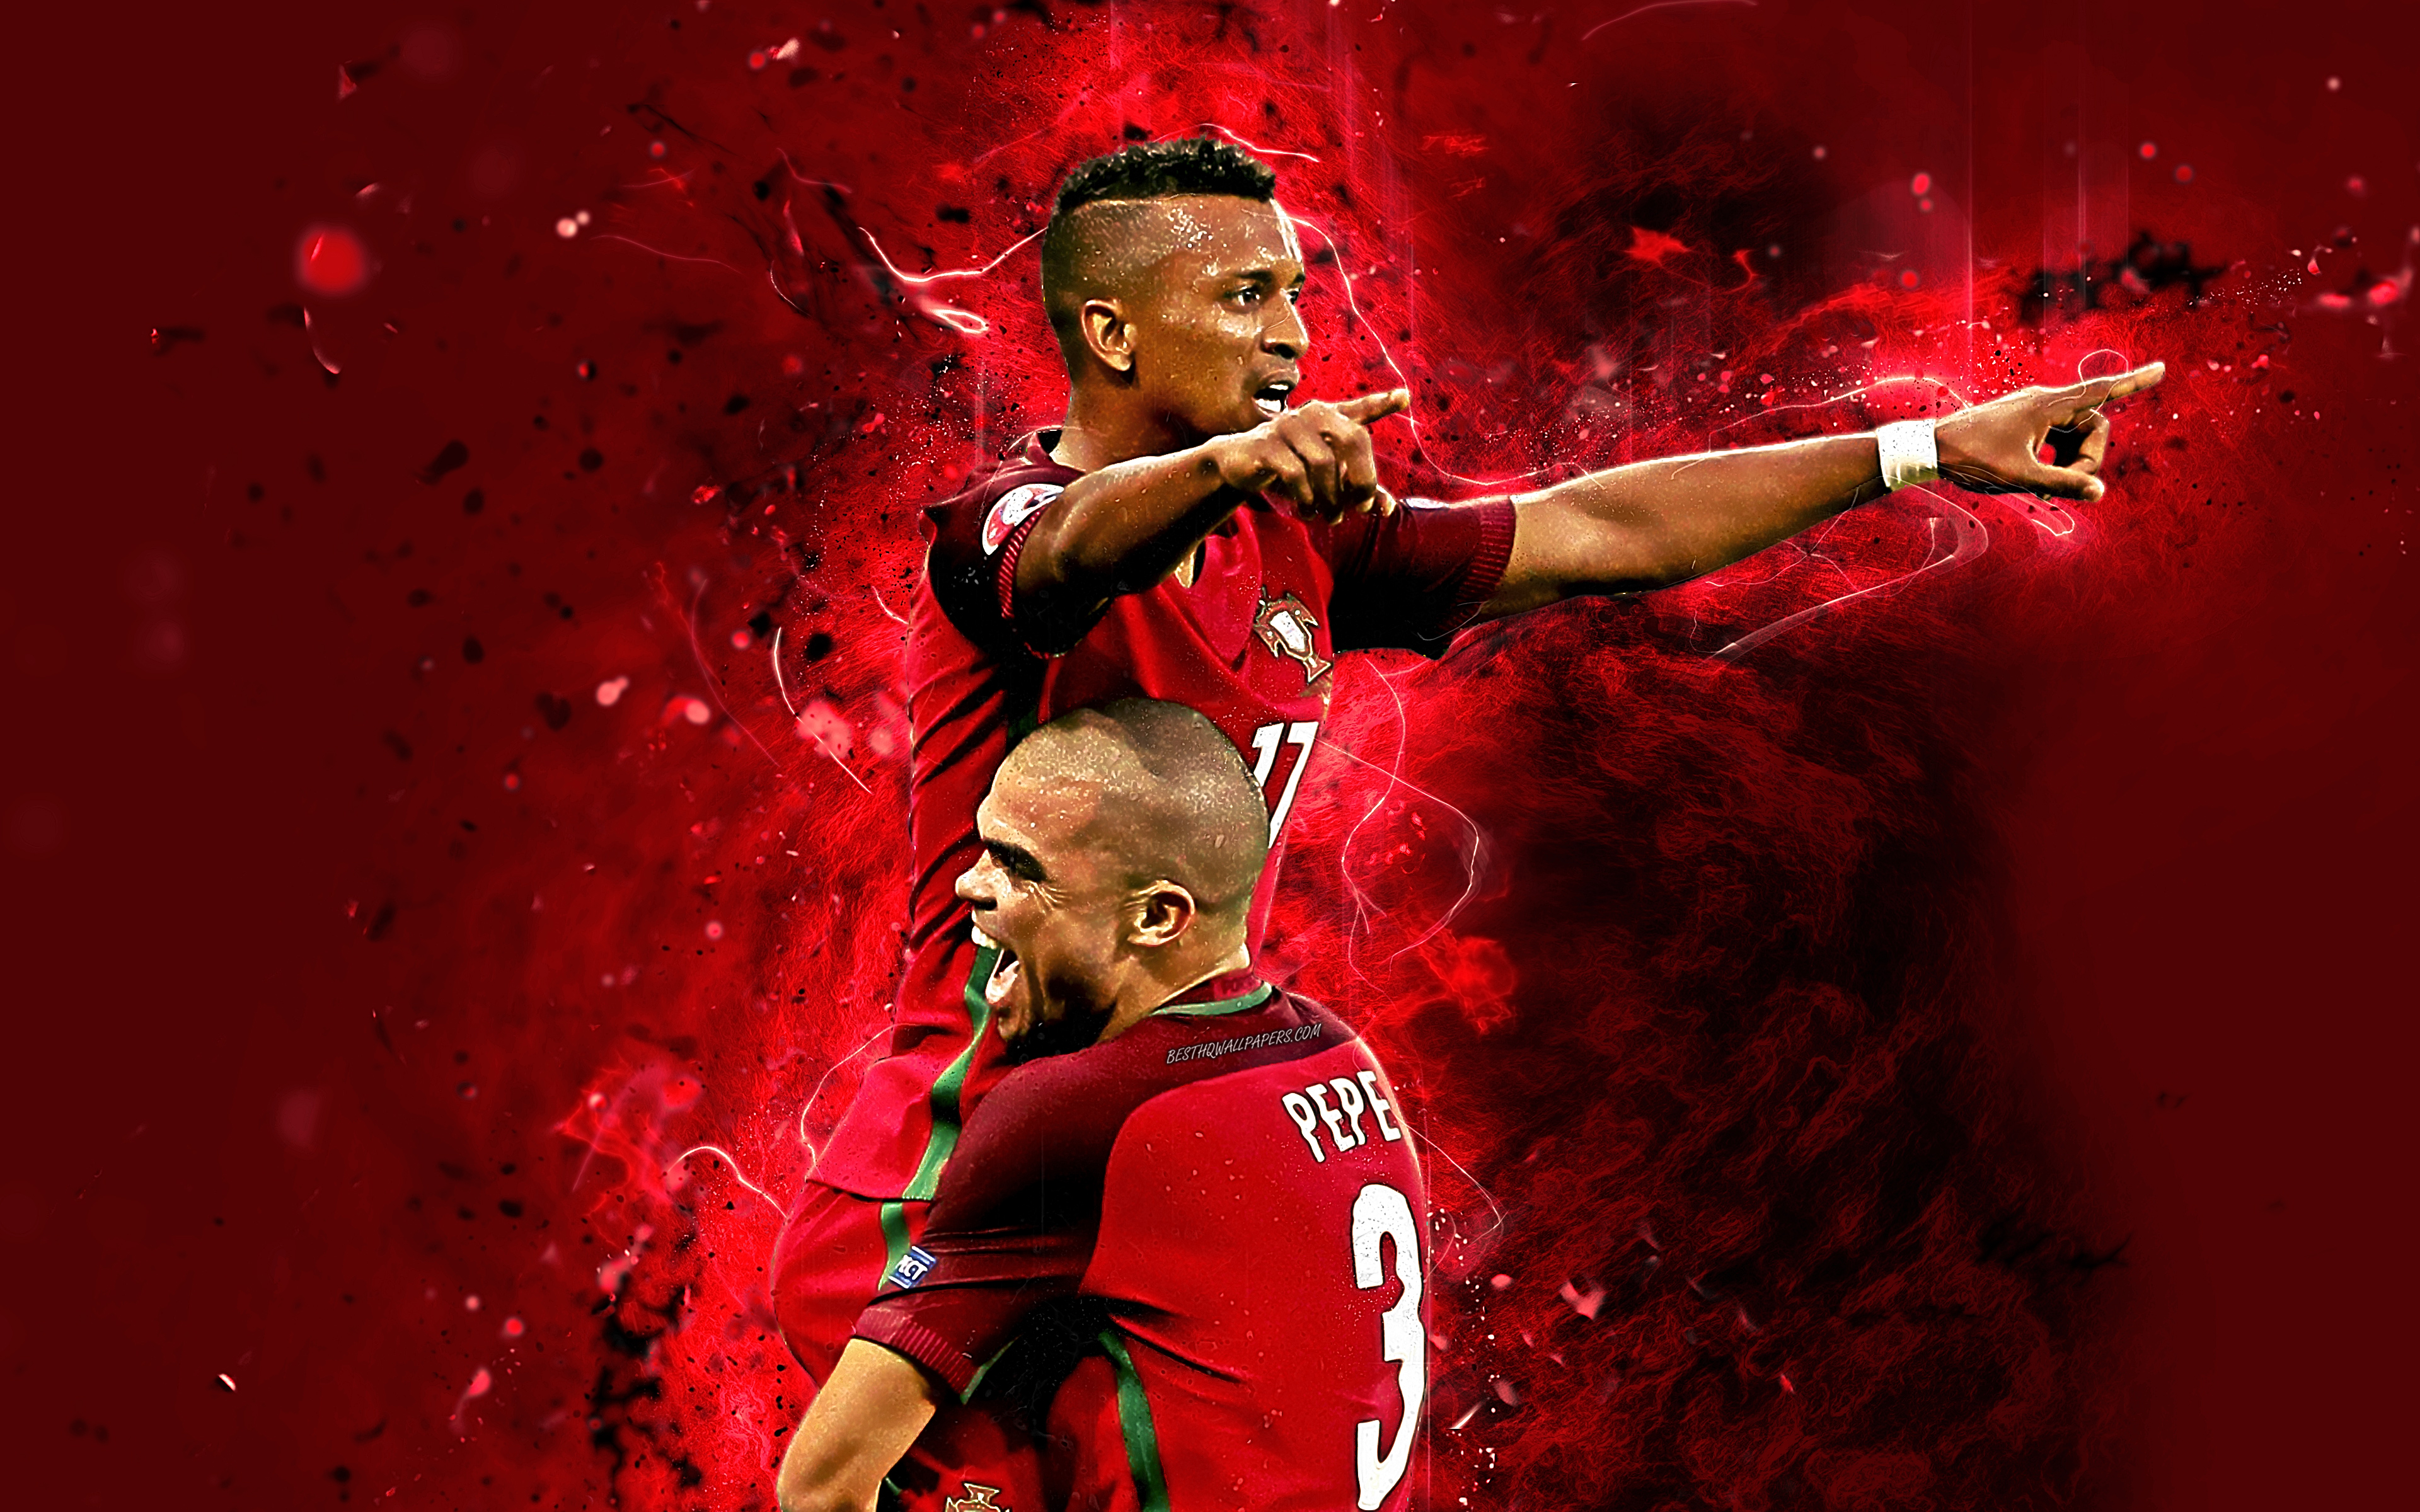 Download wallpaper 4k, Luis Nani, Pepe, goal, Portugal National Team, fan art, Nani, soccer, footballers, neon lights, Portuguese football team for desktop with resolution 3840x2400. High Quality HD picture wallpaper